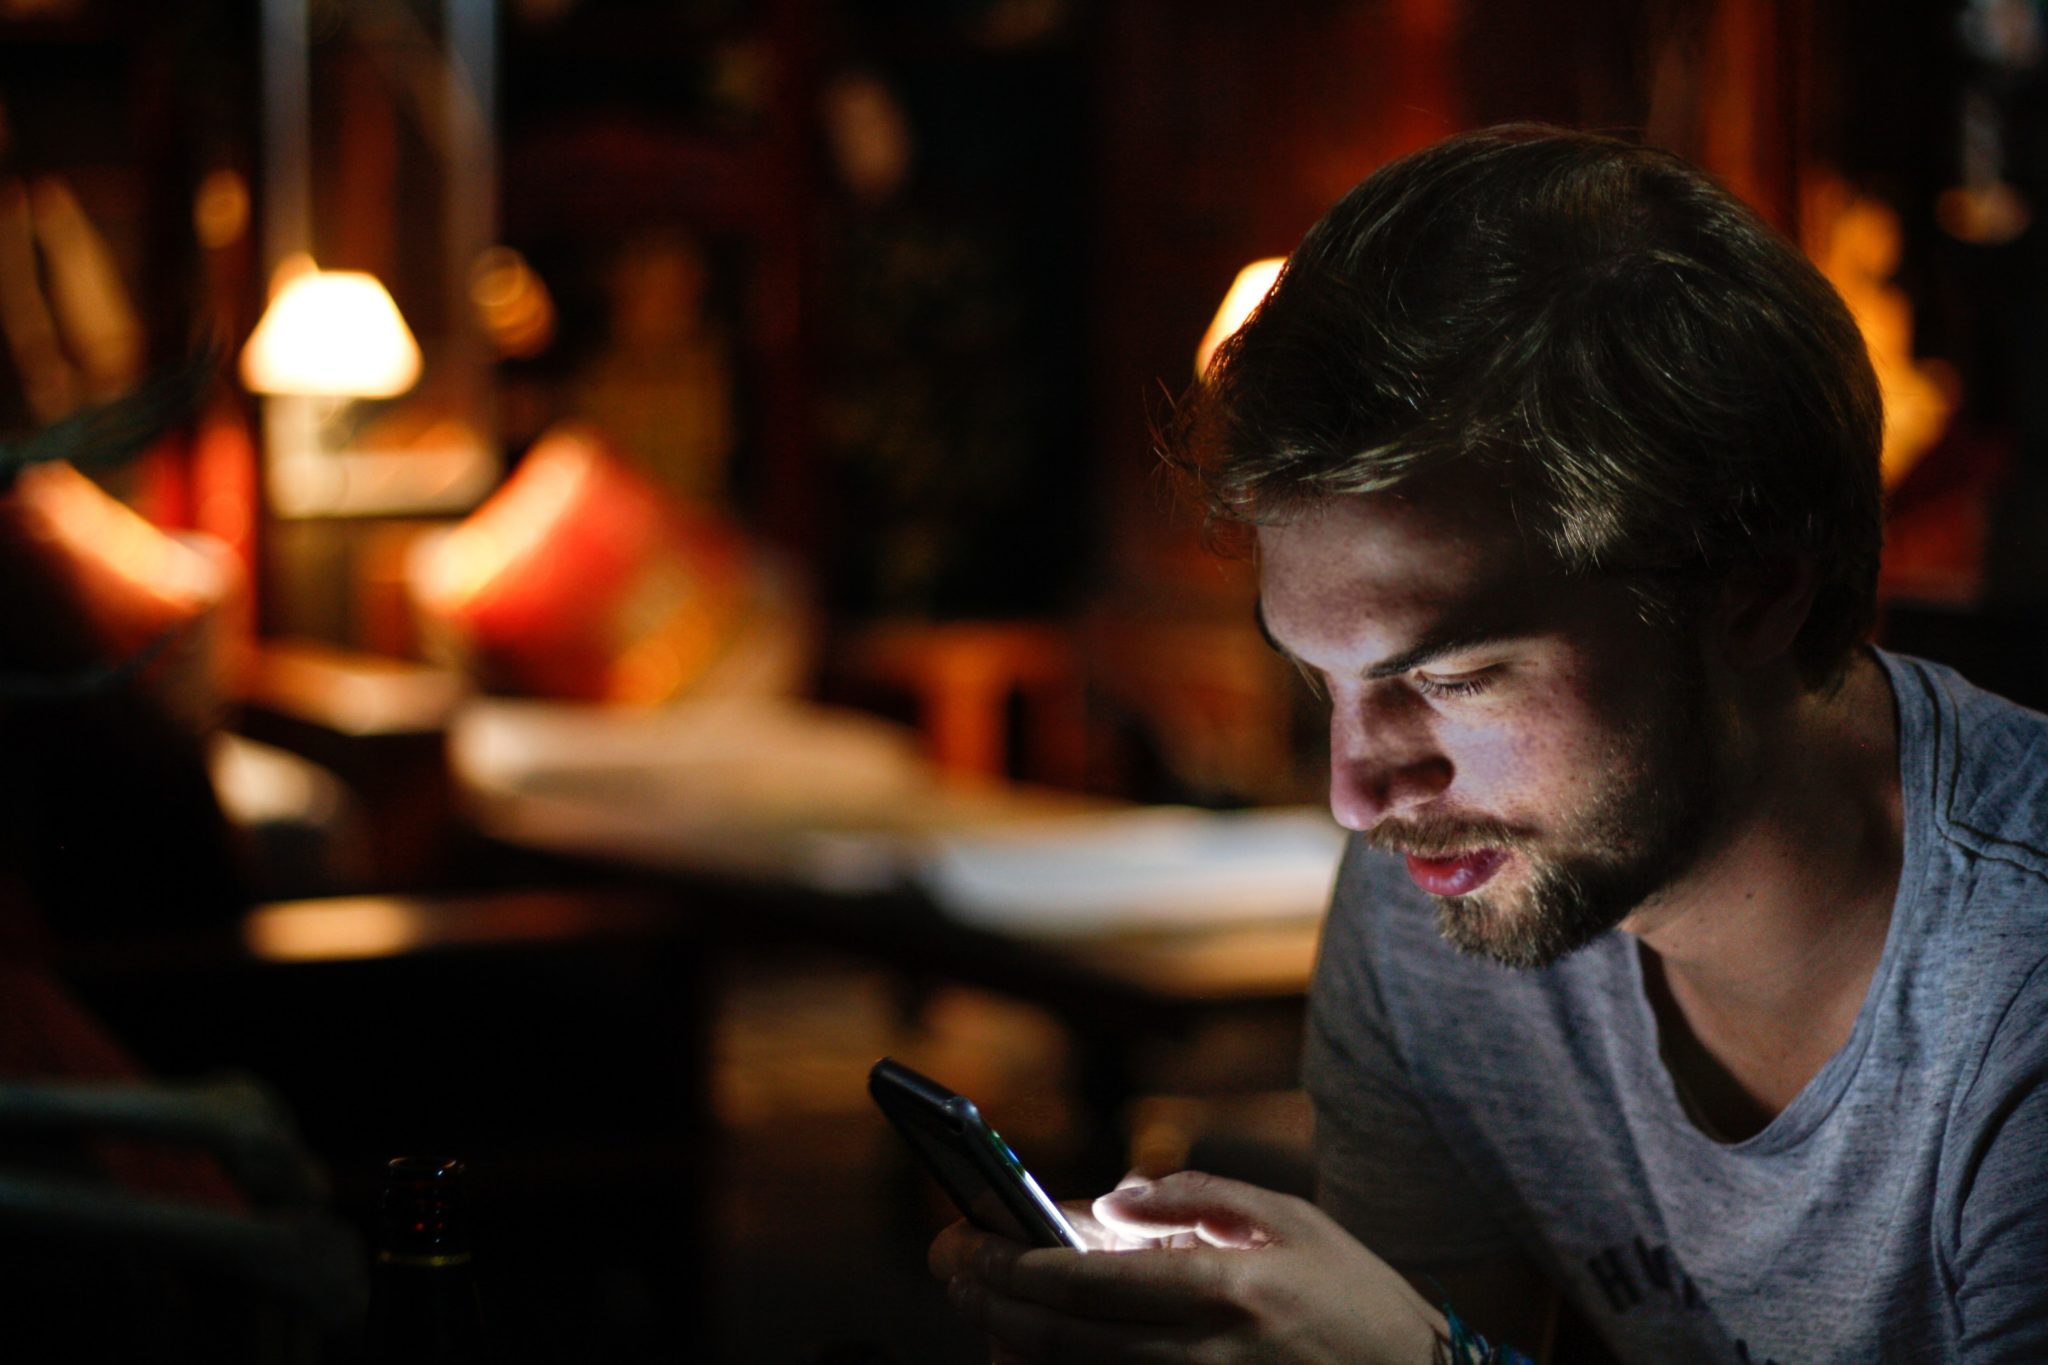 man sending a text in a restaurant at night